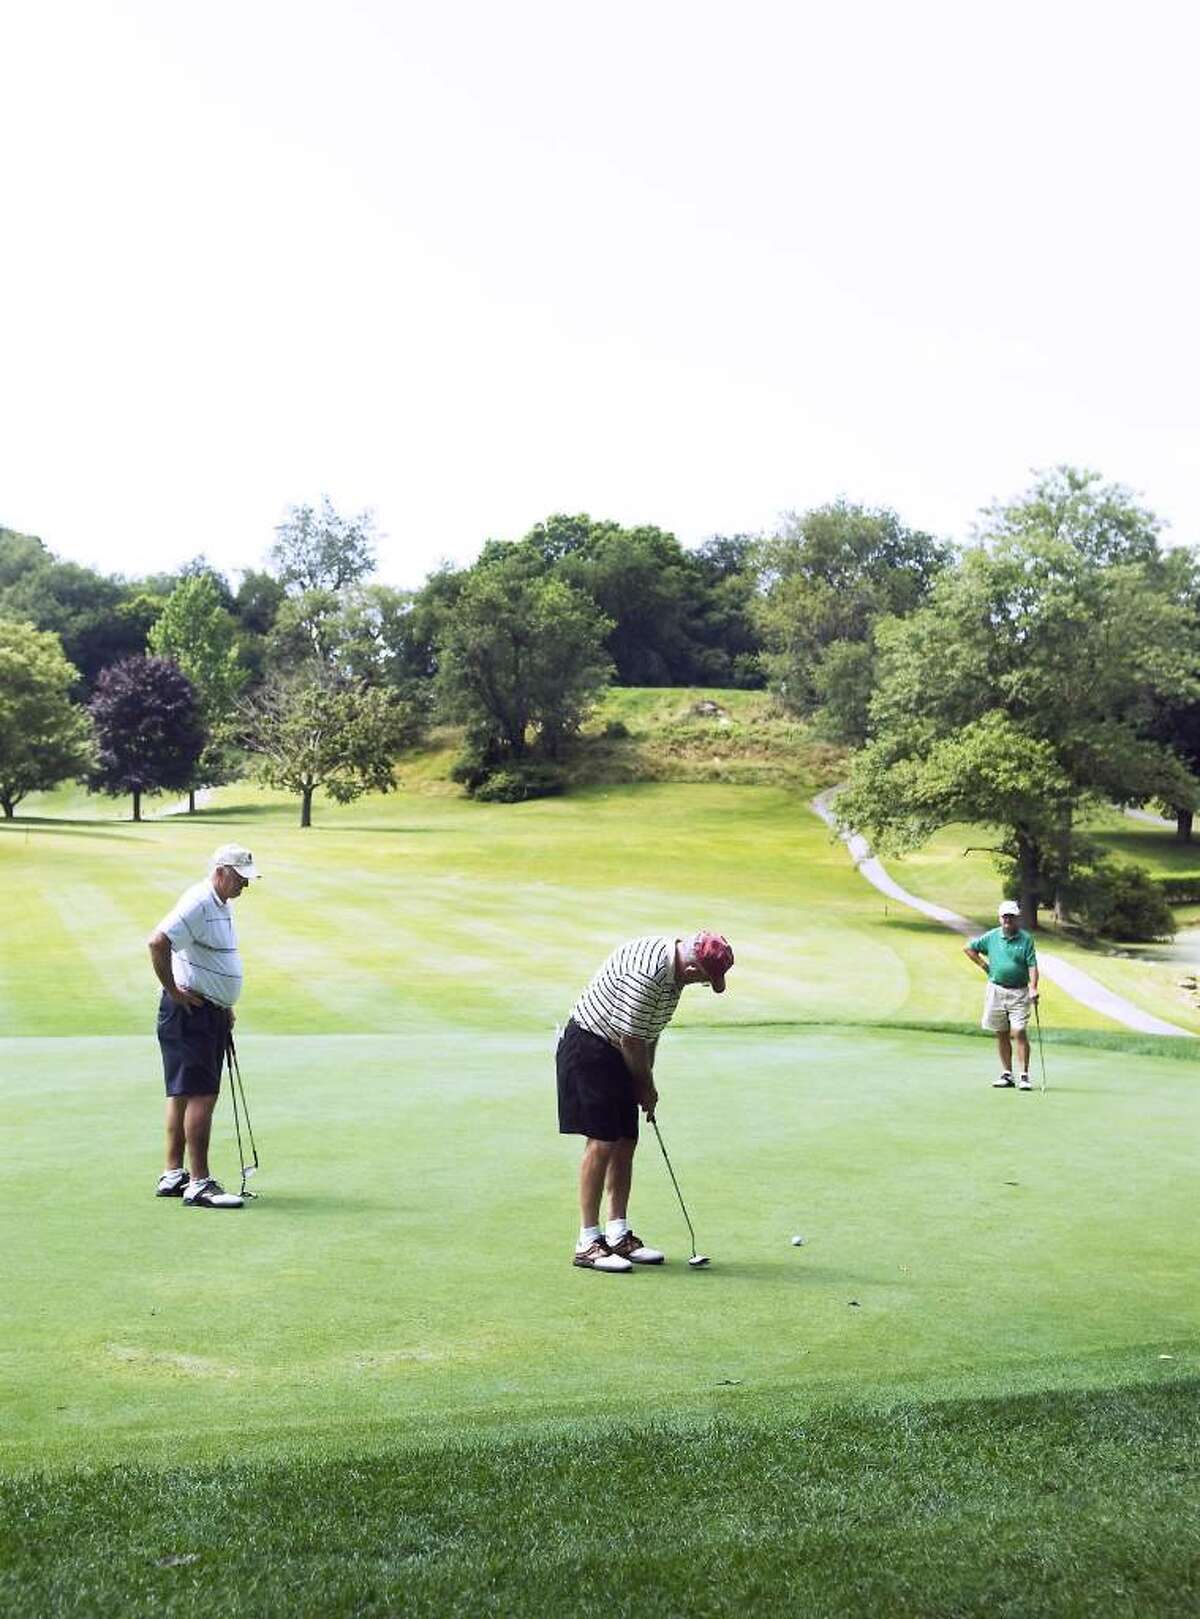 File photo of golfers as they tee off on the 13th hole at E. Gaynor Brennan Municipal Golf Course during the summer of 2009. Before taking a swing, donning those running shoes or planning a hike, it is important to make sure those muscles are ready for the motion, after a long winter’s nap.